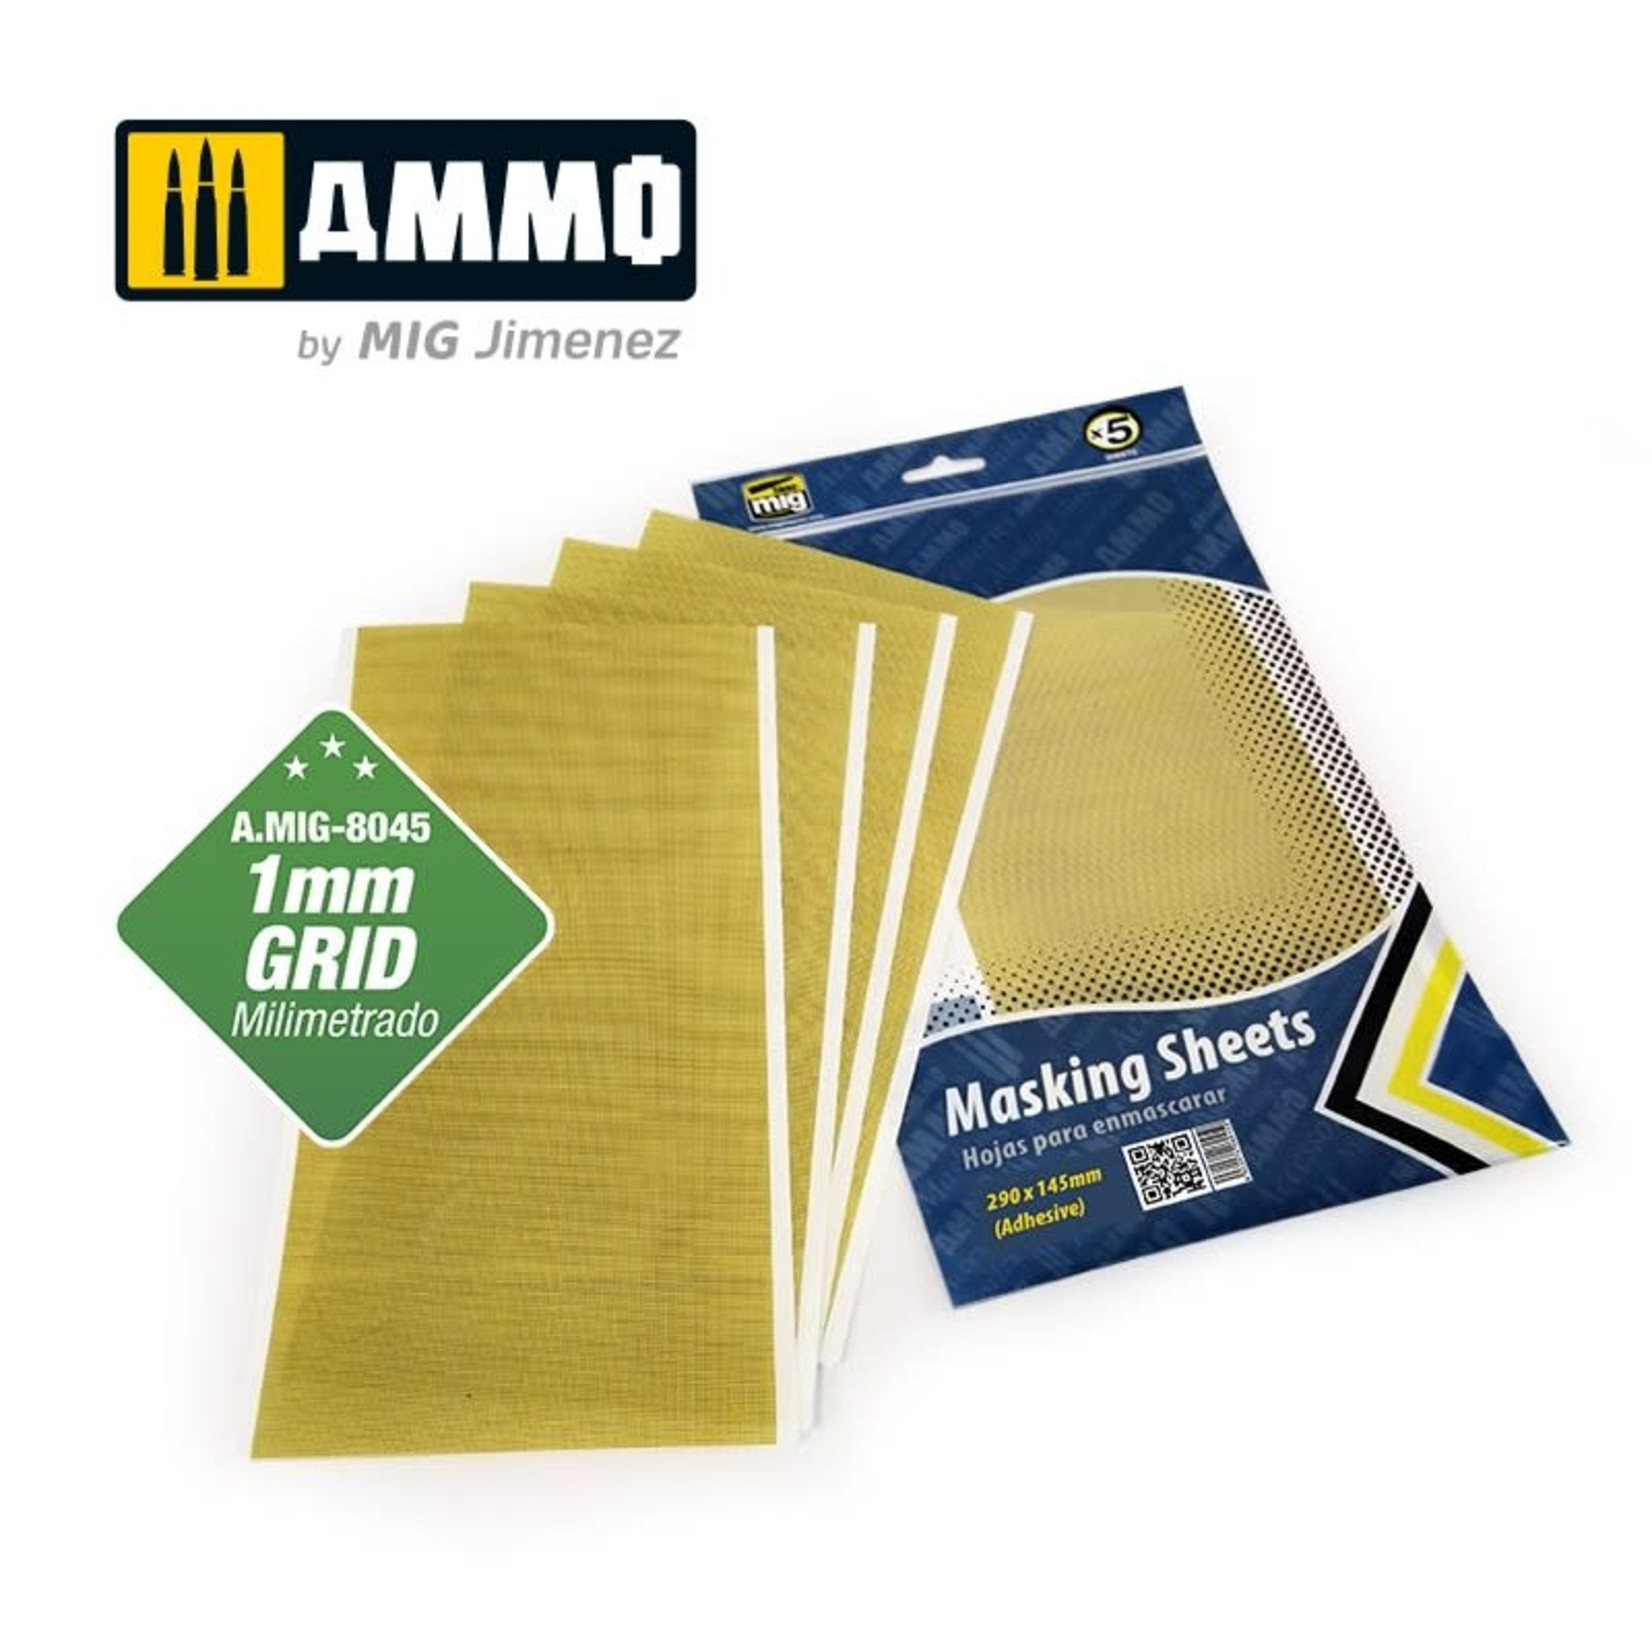 Ammo by Mig Jimenez A.MIG-8045 Adhesive Masking Sheets with 1mm Grid, 290x145mm (5) set